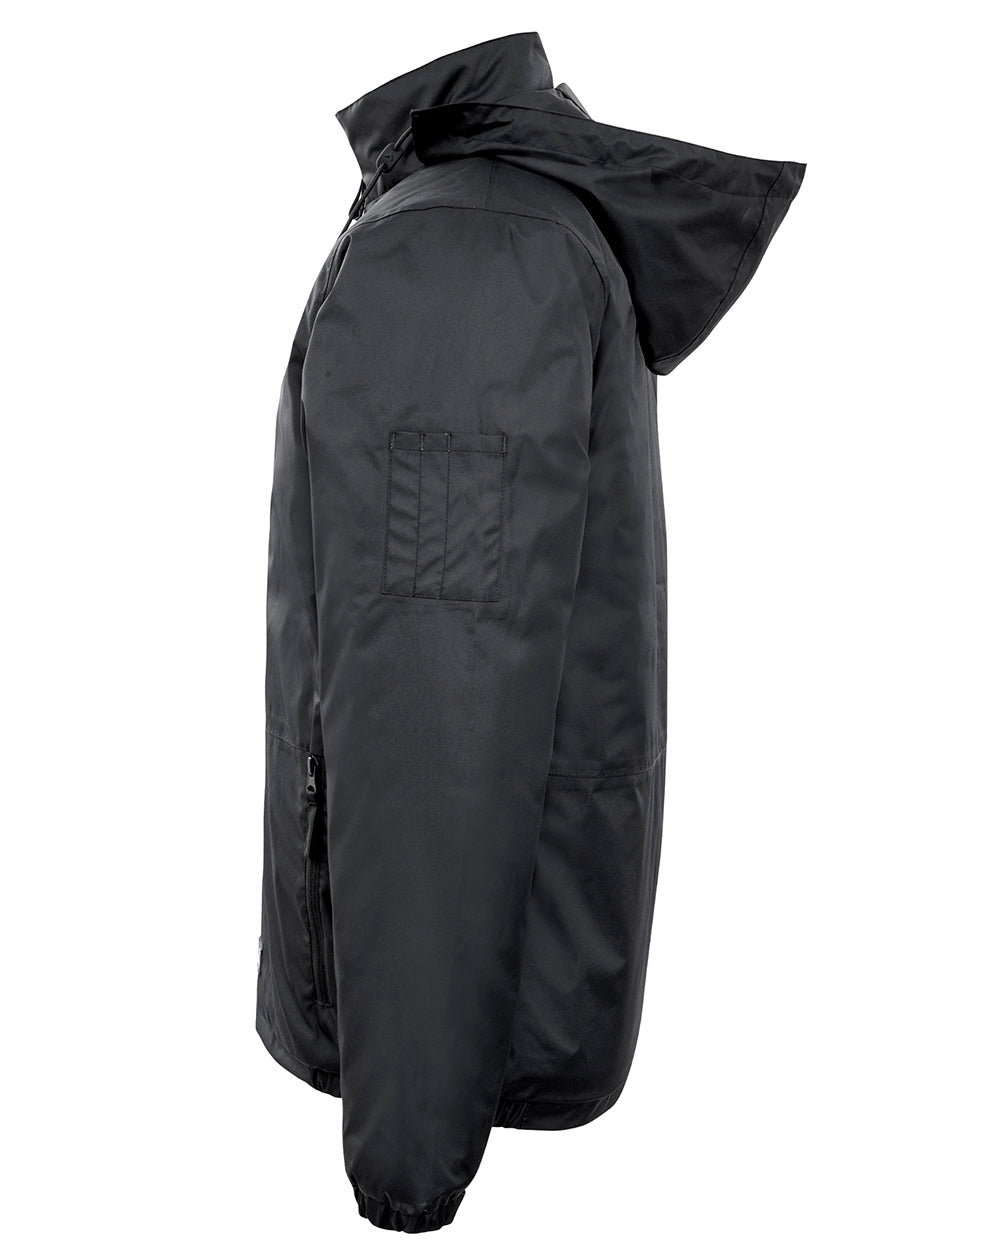 Pilot Jacket with Hood in Black